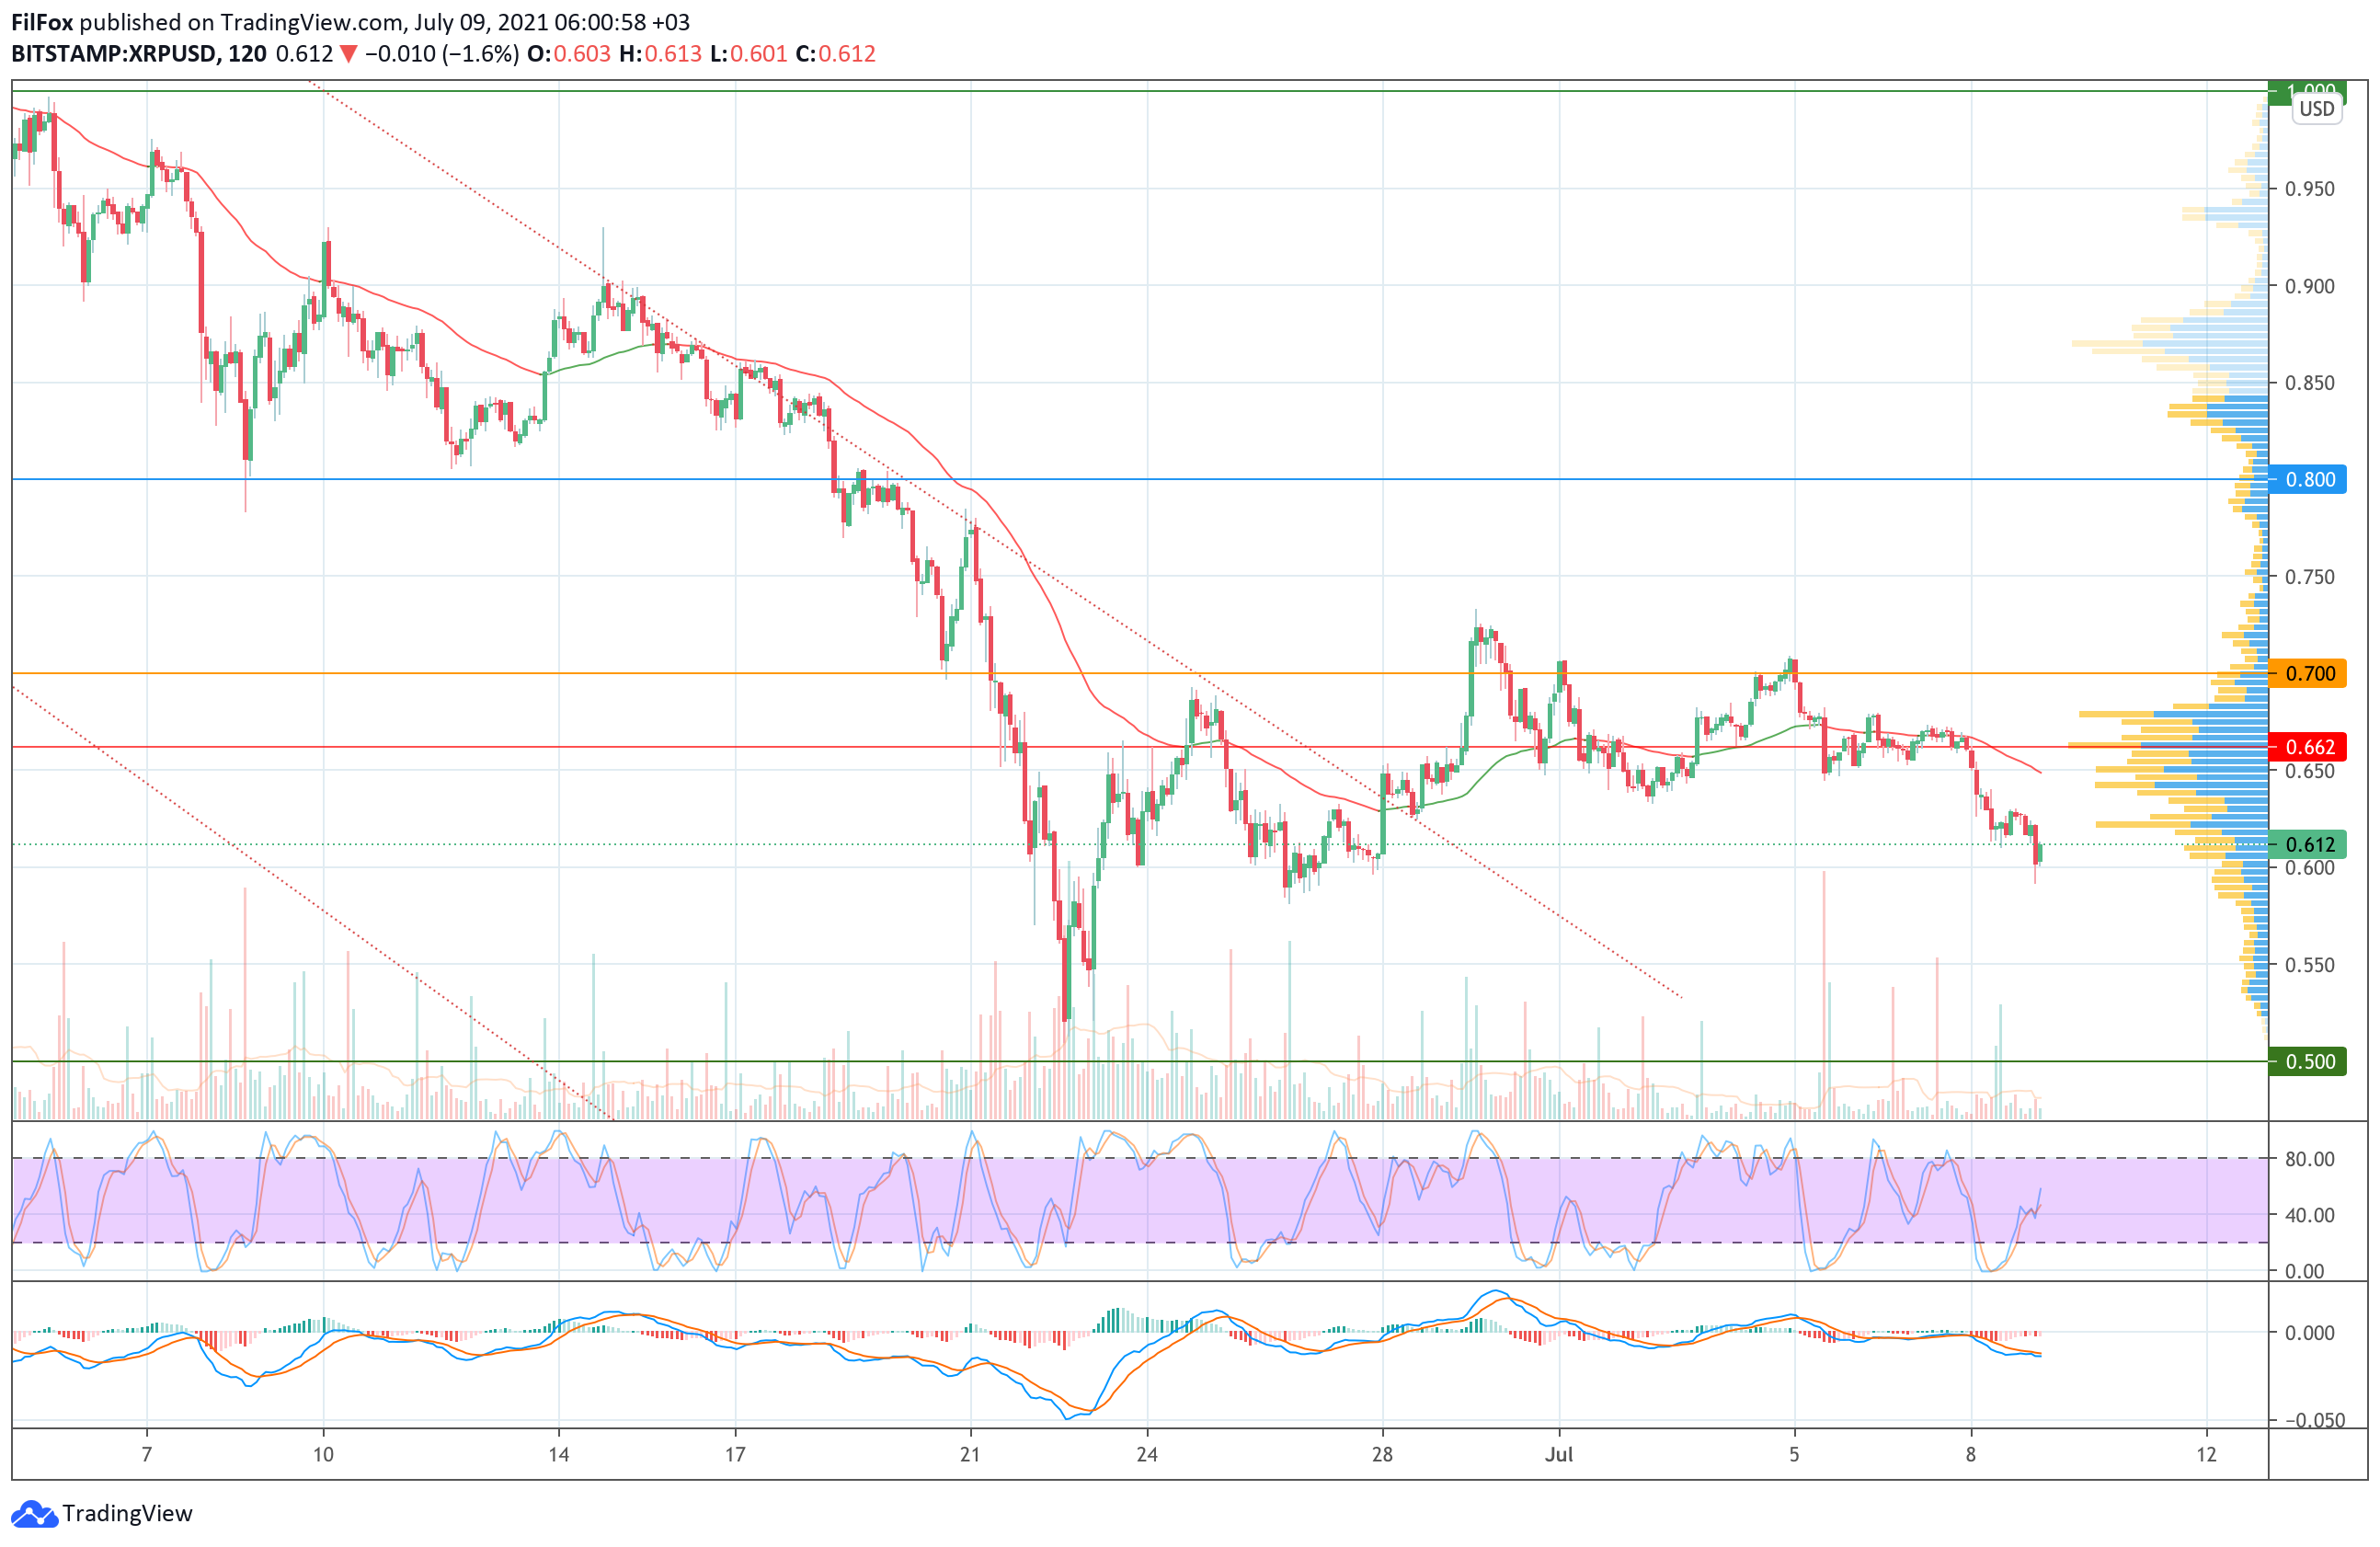 Analysis of the prices of Bitcoin, Ethereum, XRP for 07/09/2021